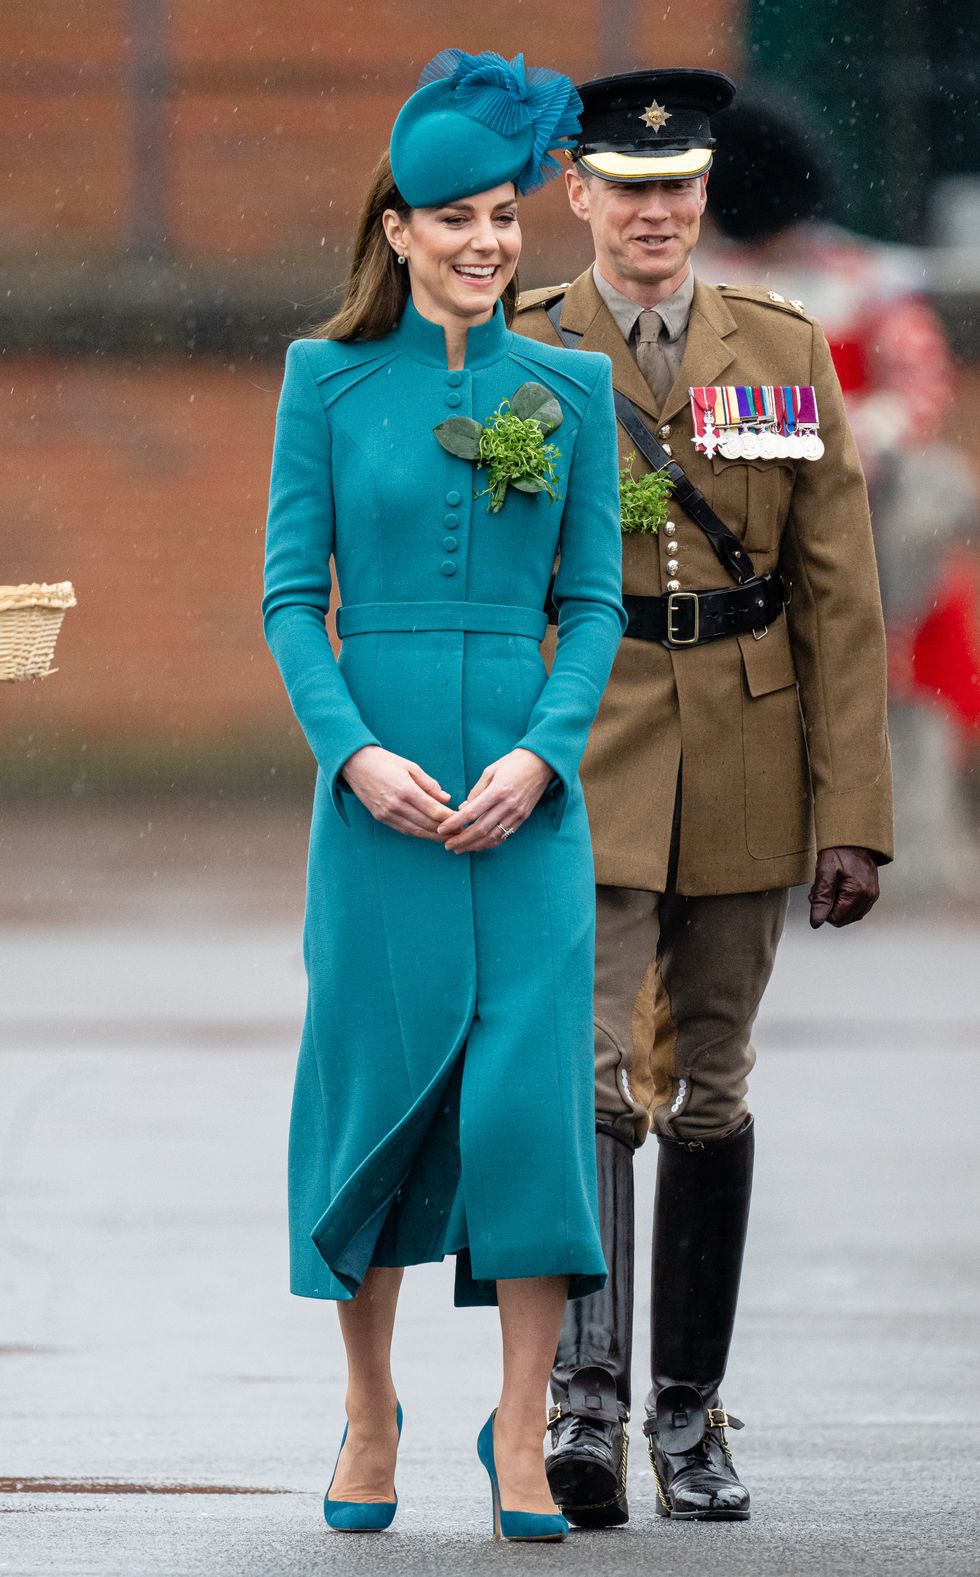 aldershot, england march 17 catherine, princess of wales attend the 2023 st patricks day parade at mons barracks on march 17, 2023 in aldershot, england photo by samir husseinwireimage